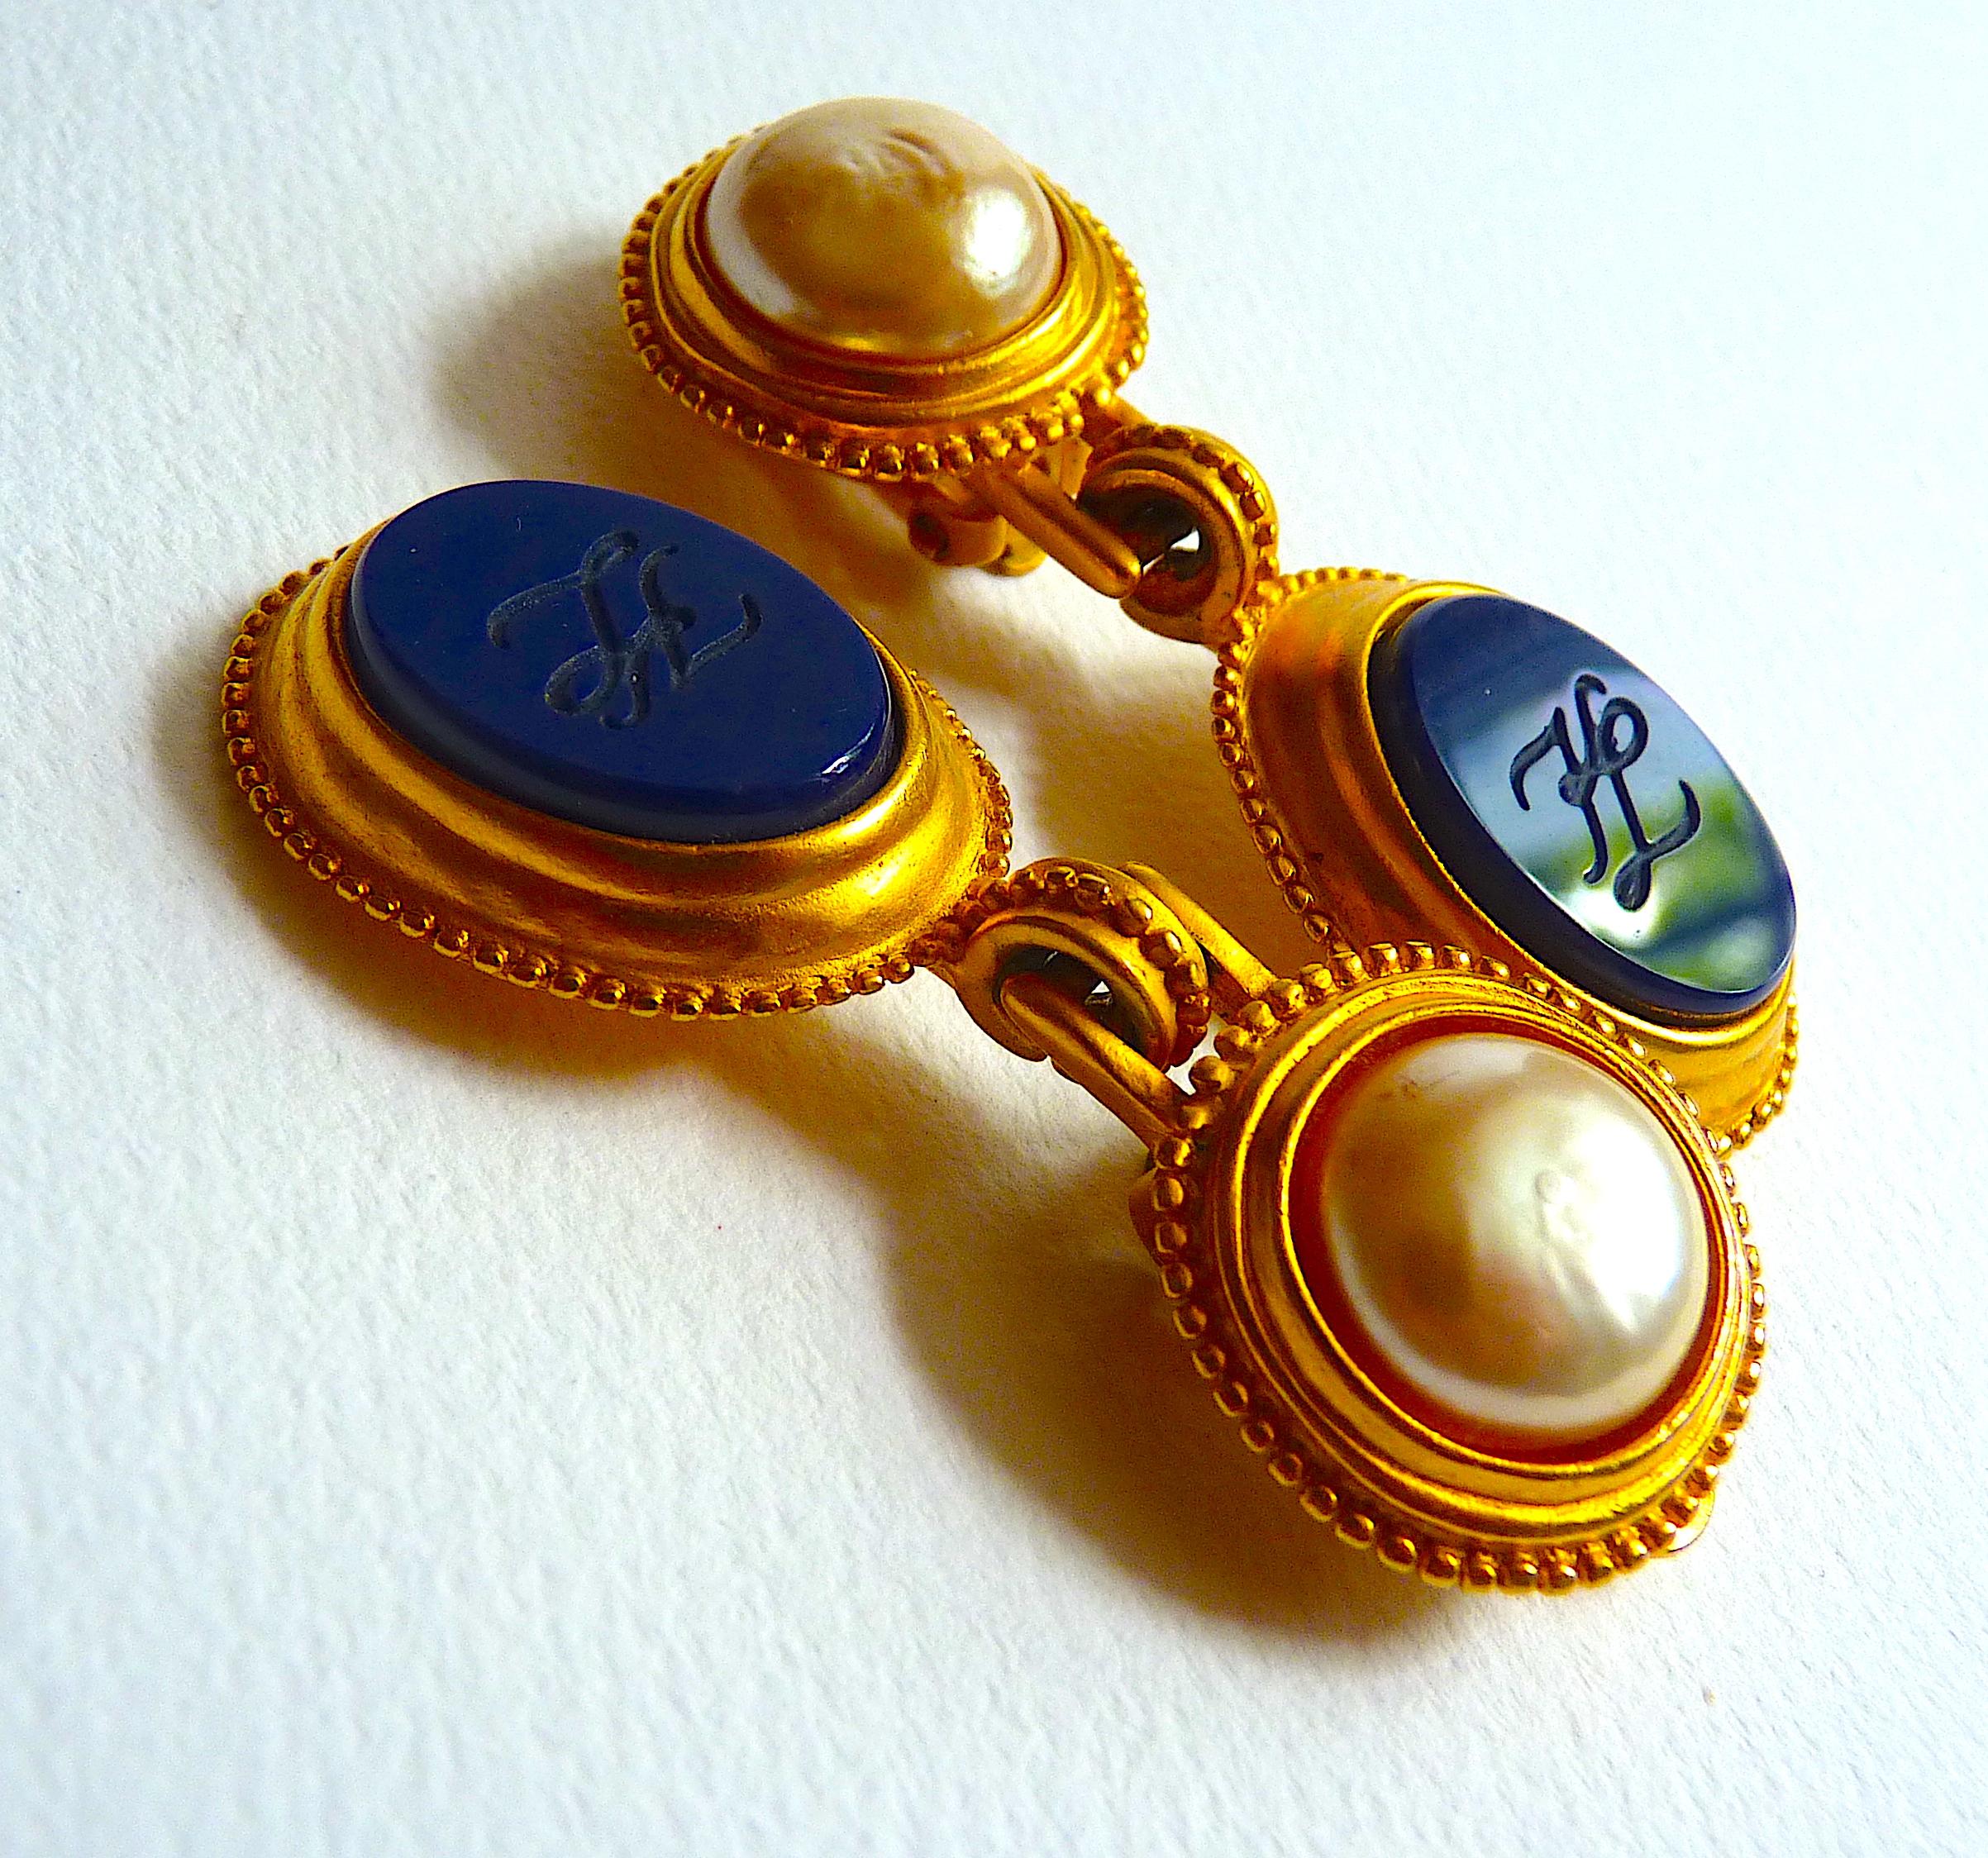 KARL LAGERFELD Drop Earrings, Gold tone Metal, White Faux Pearl and Deep Blue Stone imitating Onyx, engraved with a KL Monogram, Vintage from the 80s
Stamped at Back with the Monogram KL and the famous fan which was a Signature for many 1980s and